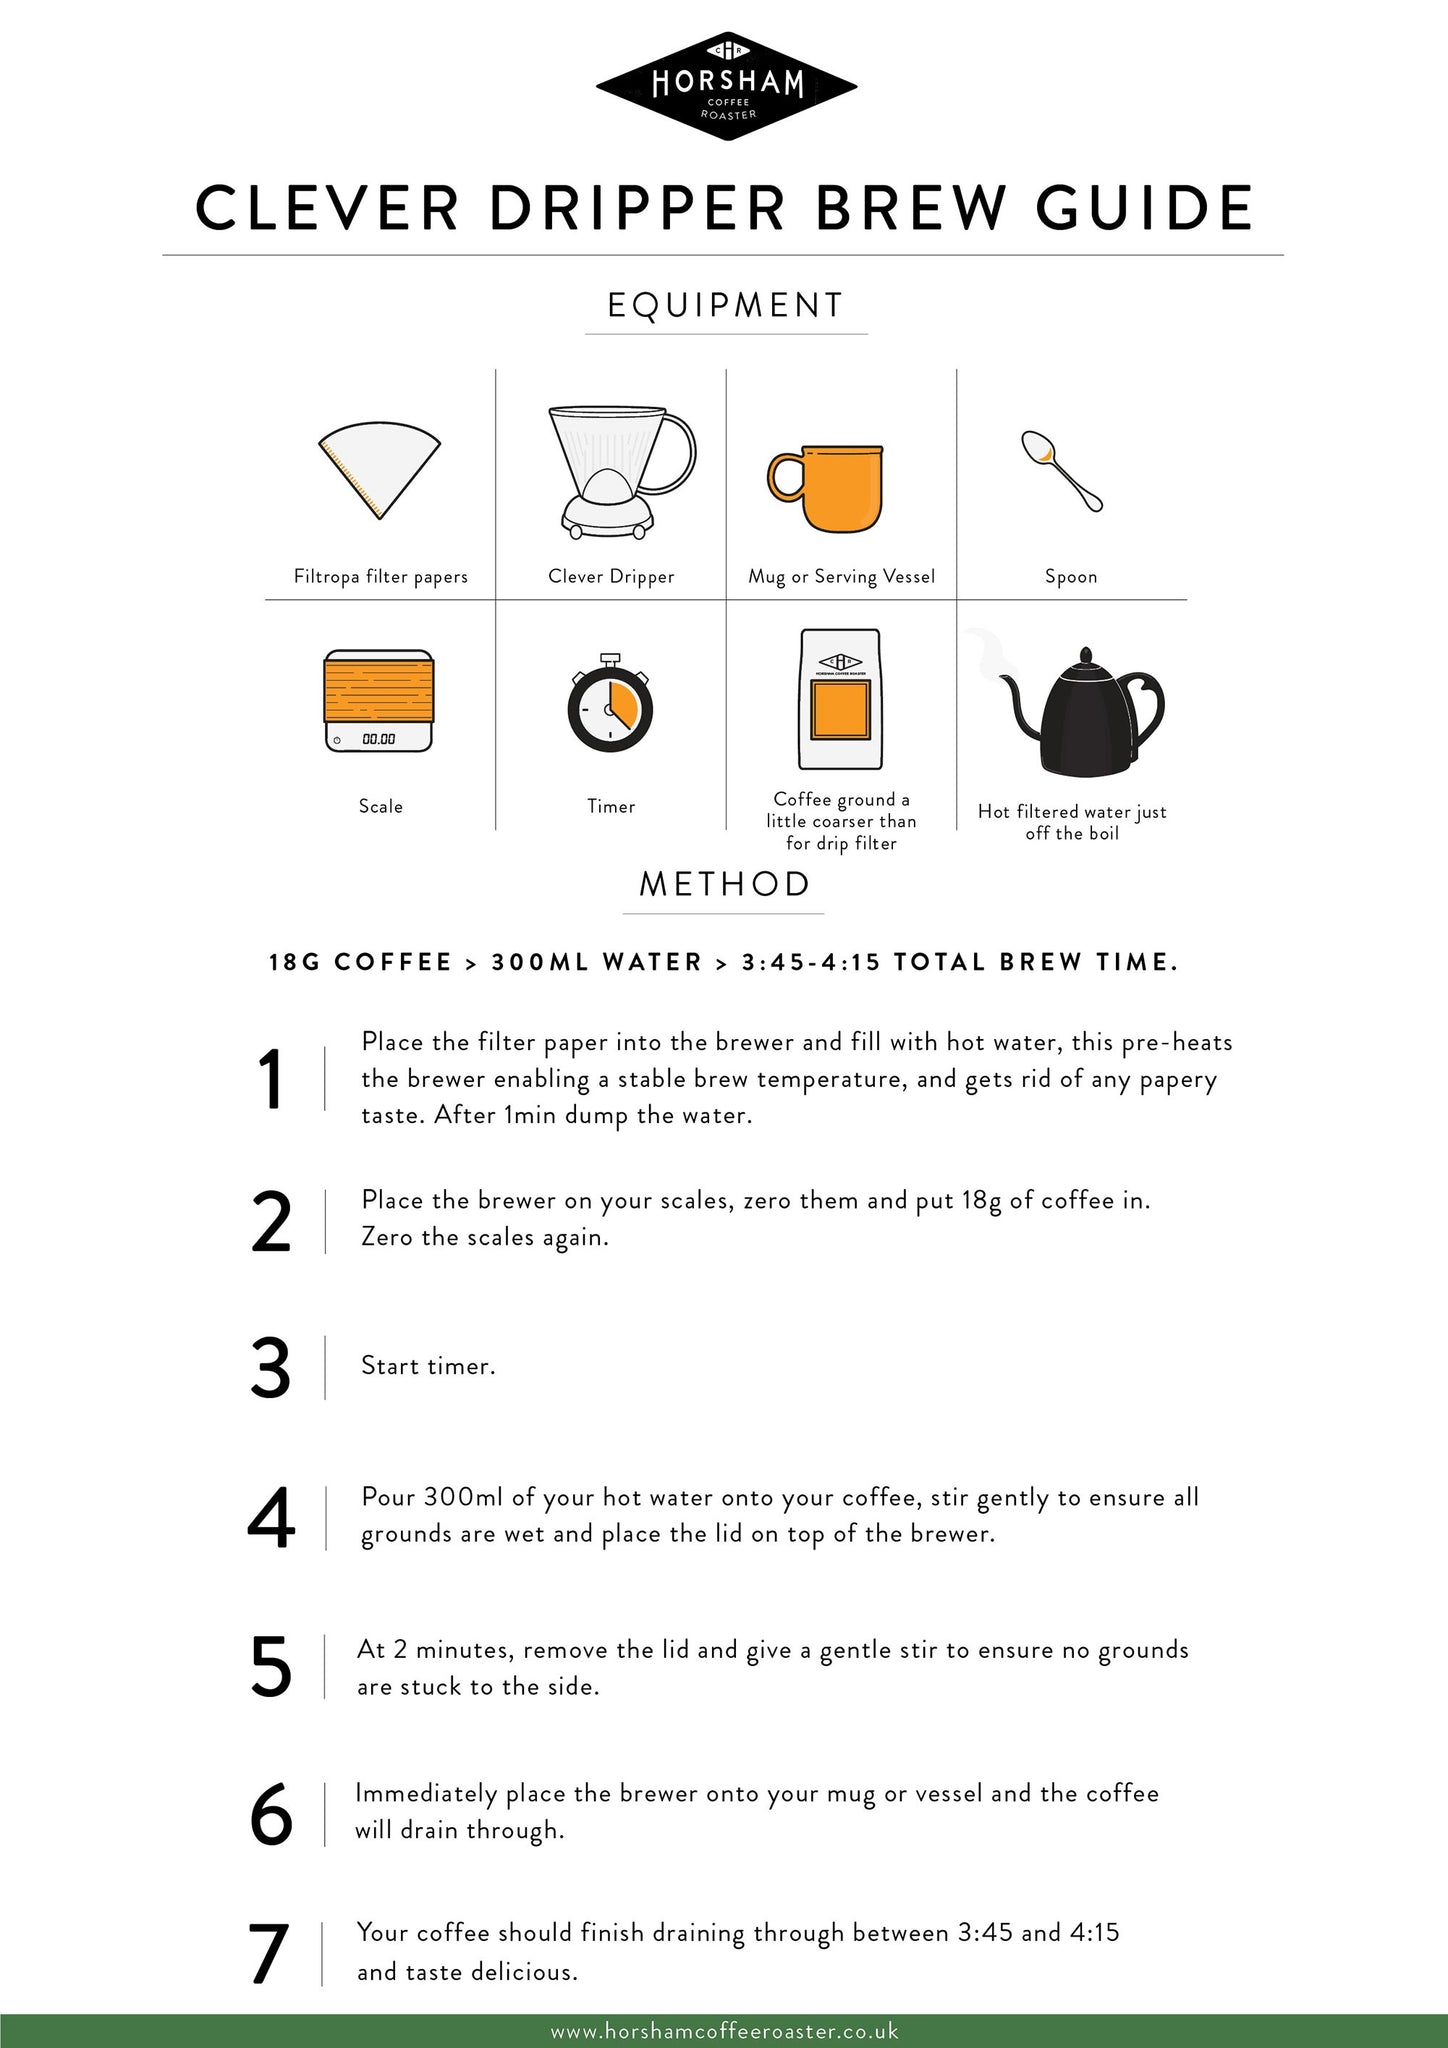 Clever dripper coffee brew guide